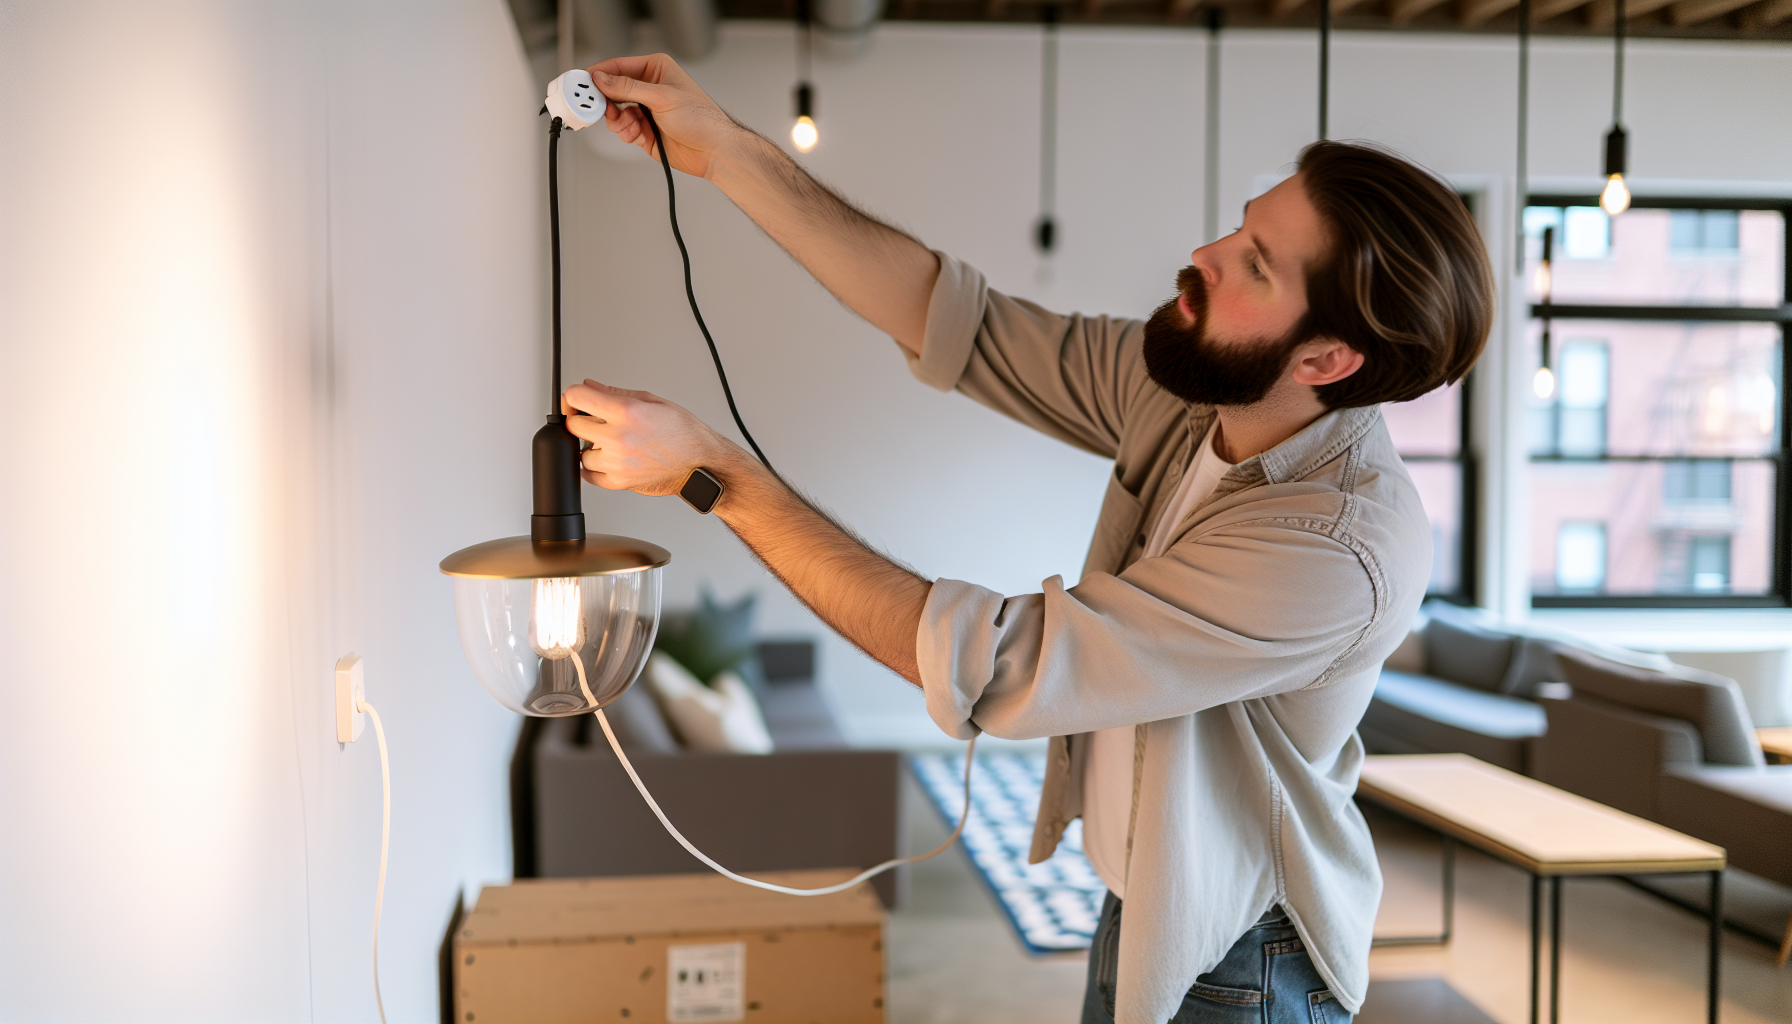 Plug-in pendant light installation in a rental space